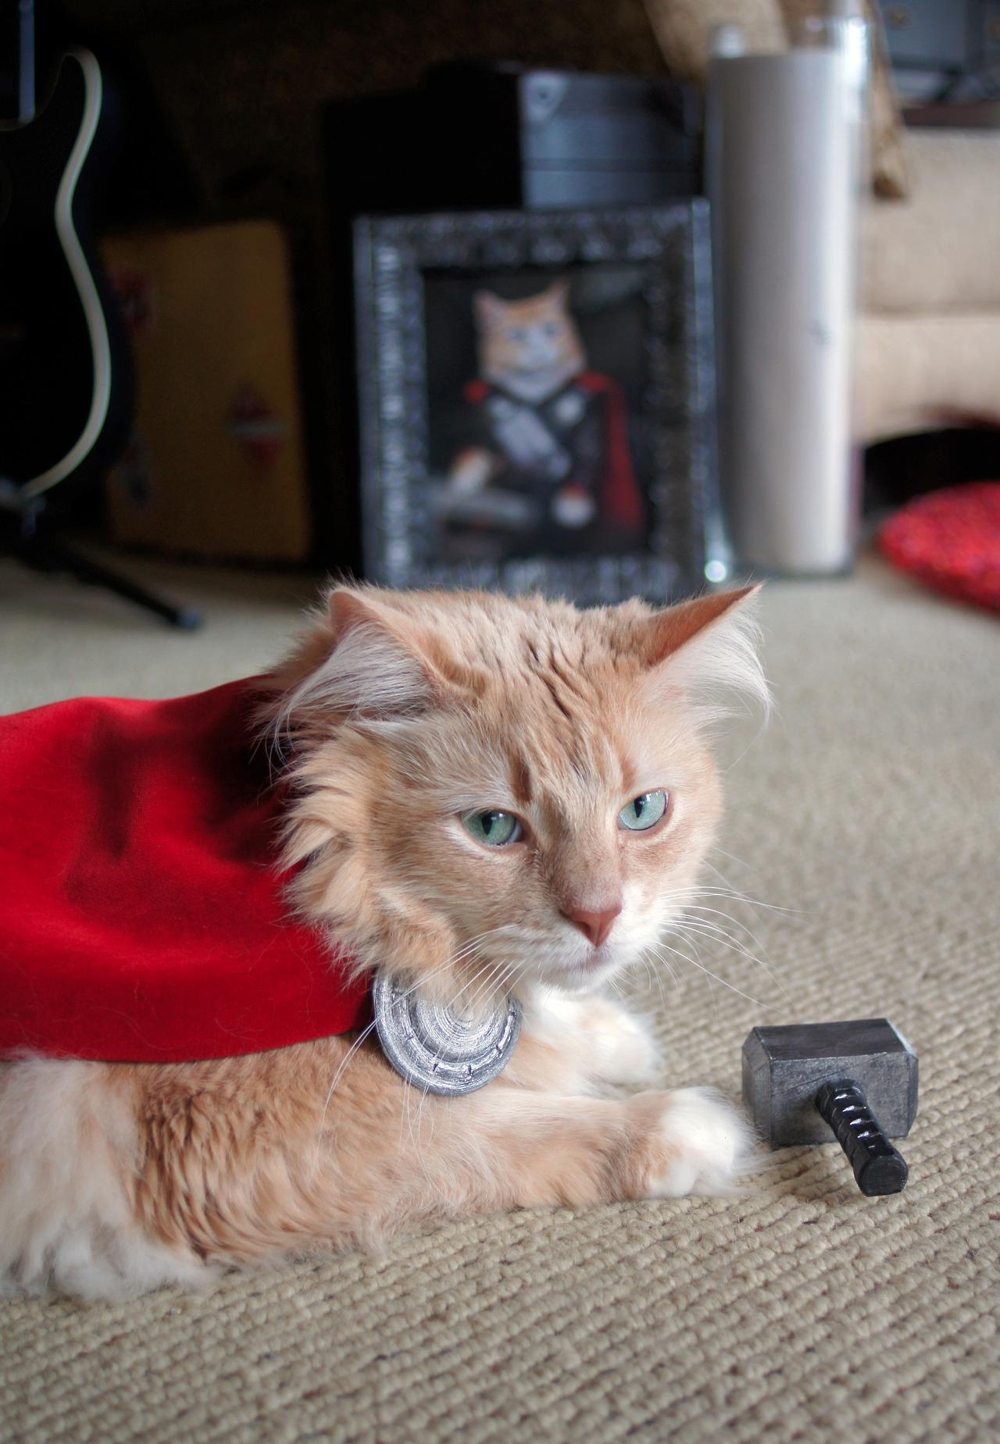 Here’s a Cat Dressed Up Like Thor